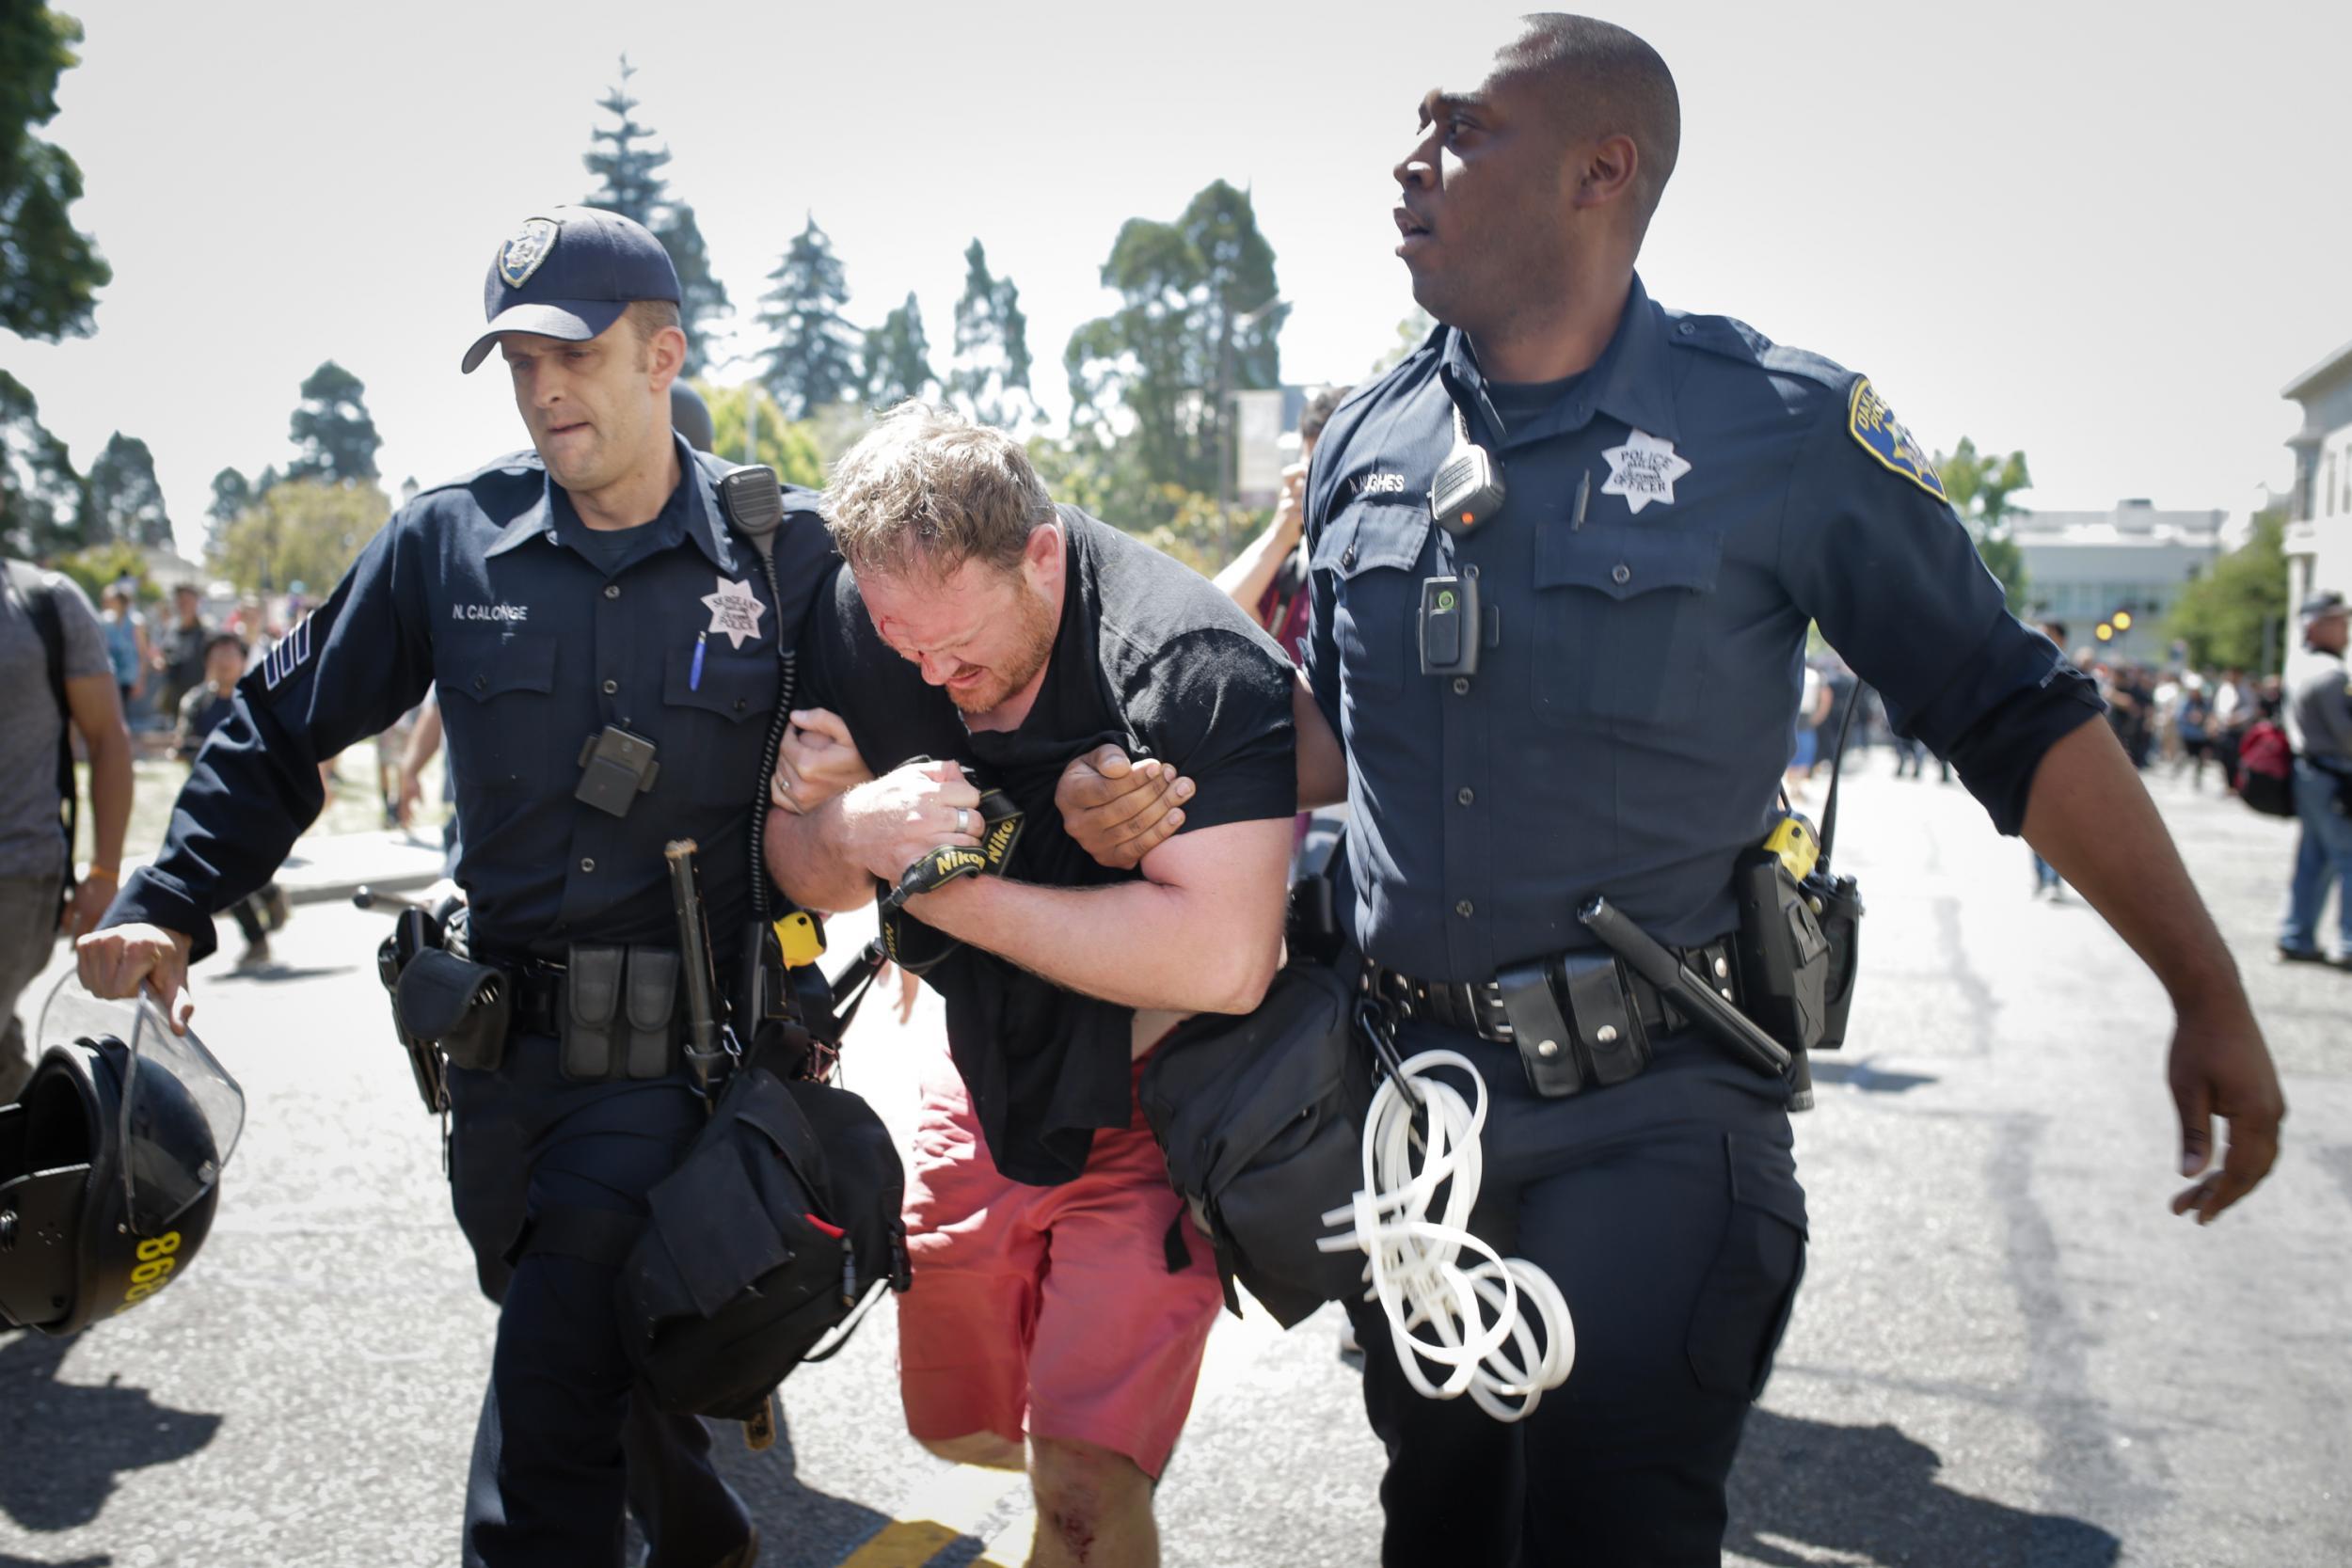 Police officers extricate a man who was beaten by people aligned with Antifa after he was suspected of being a right-wing Trump supporter (Getty)